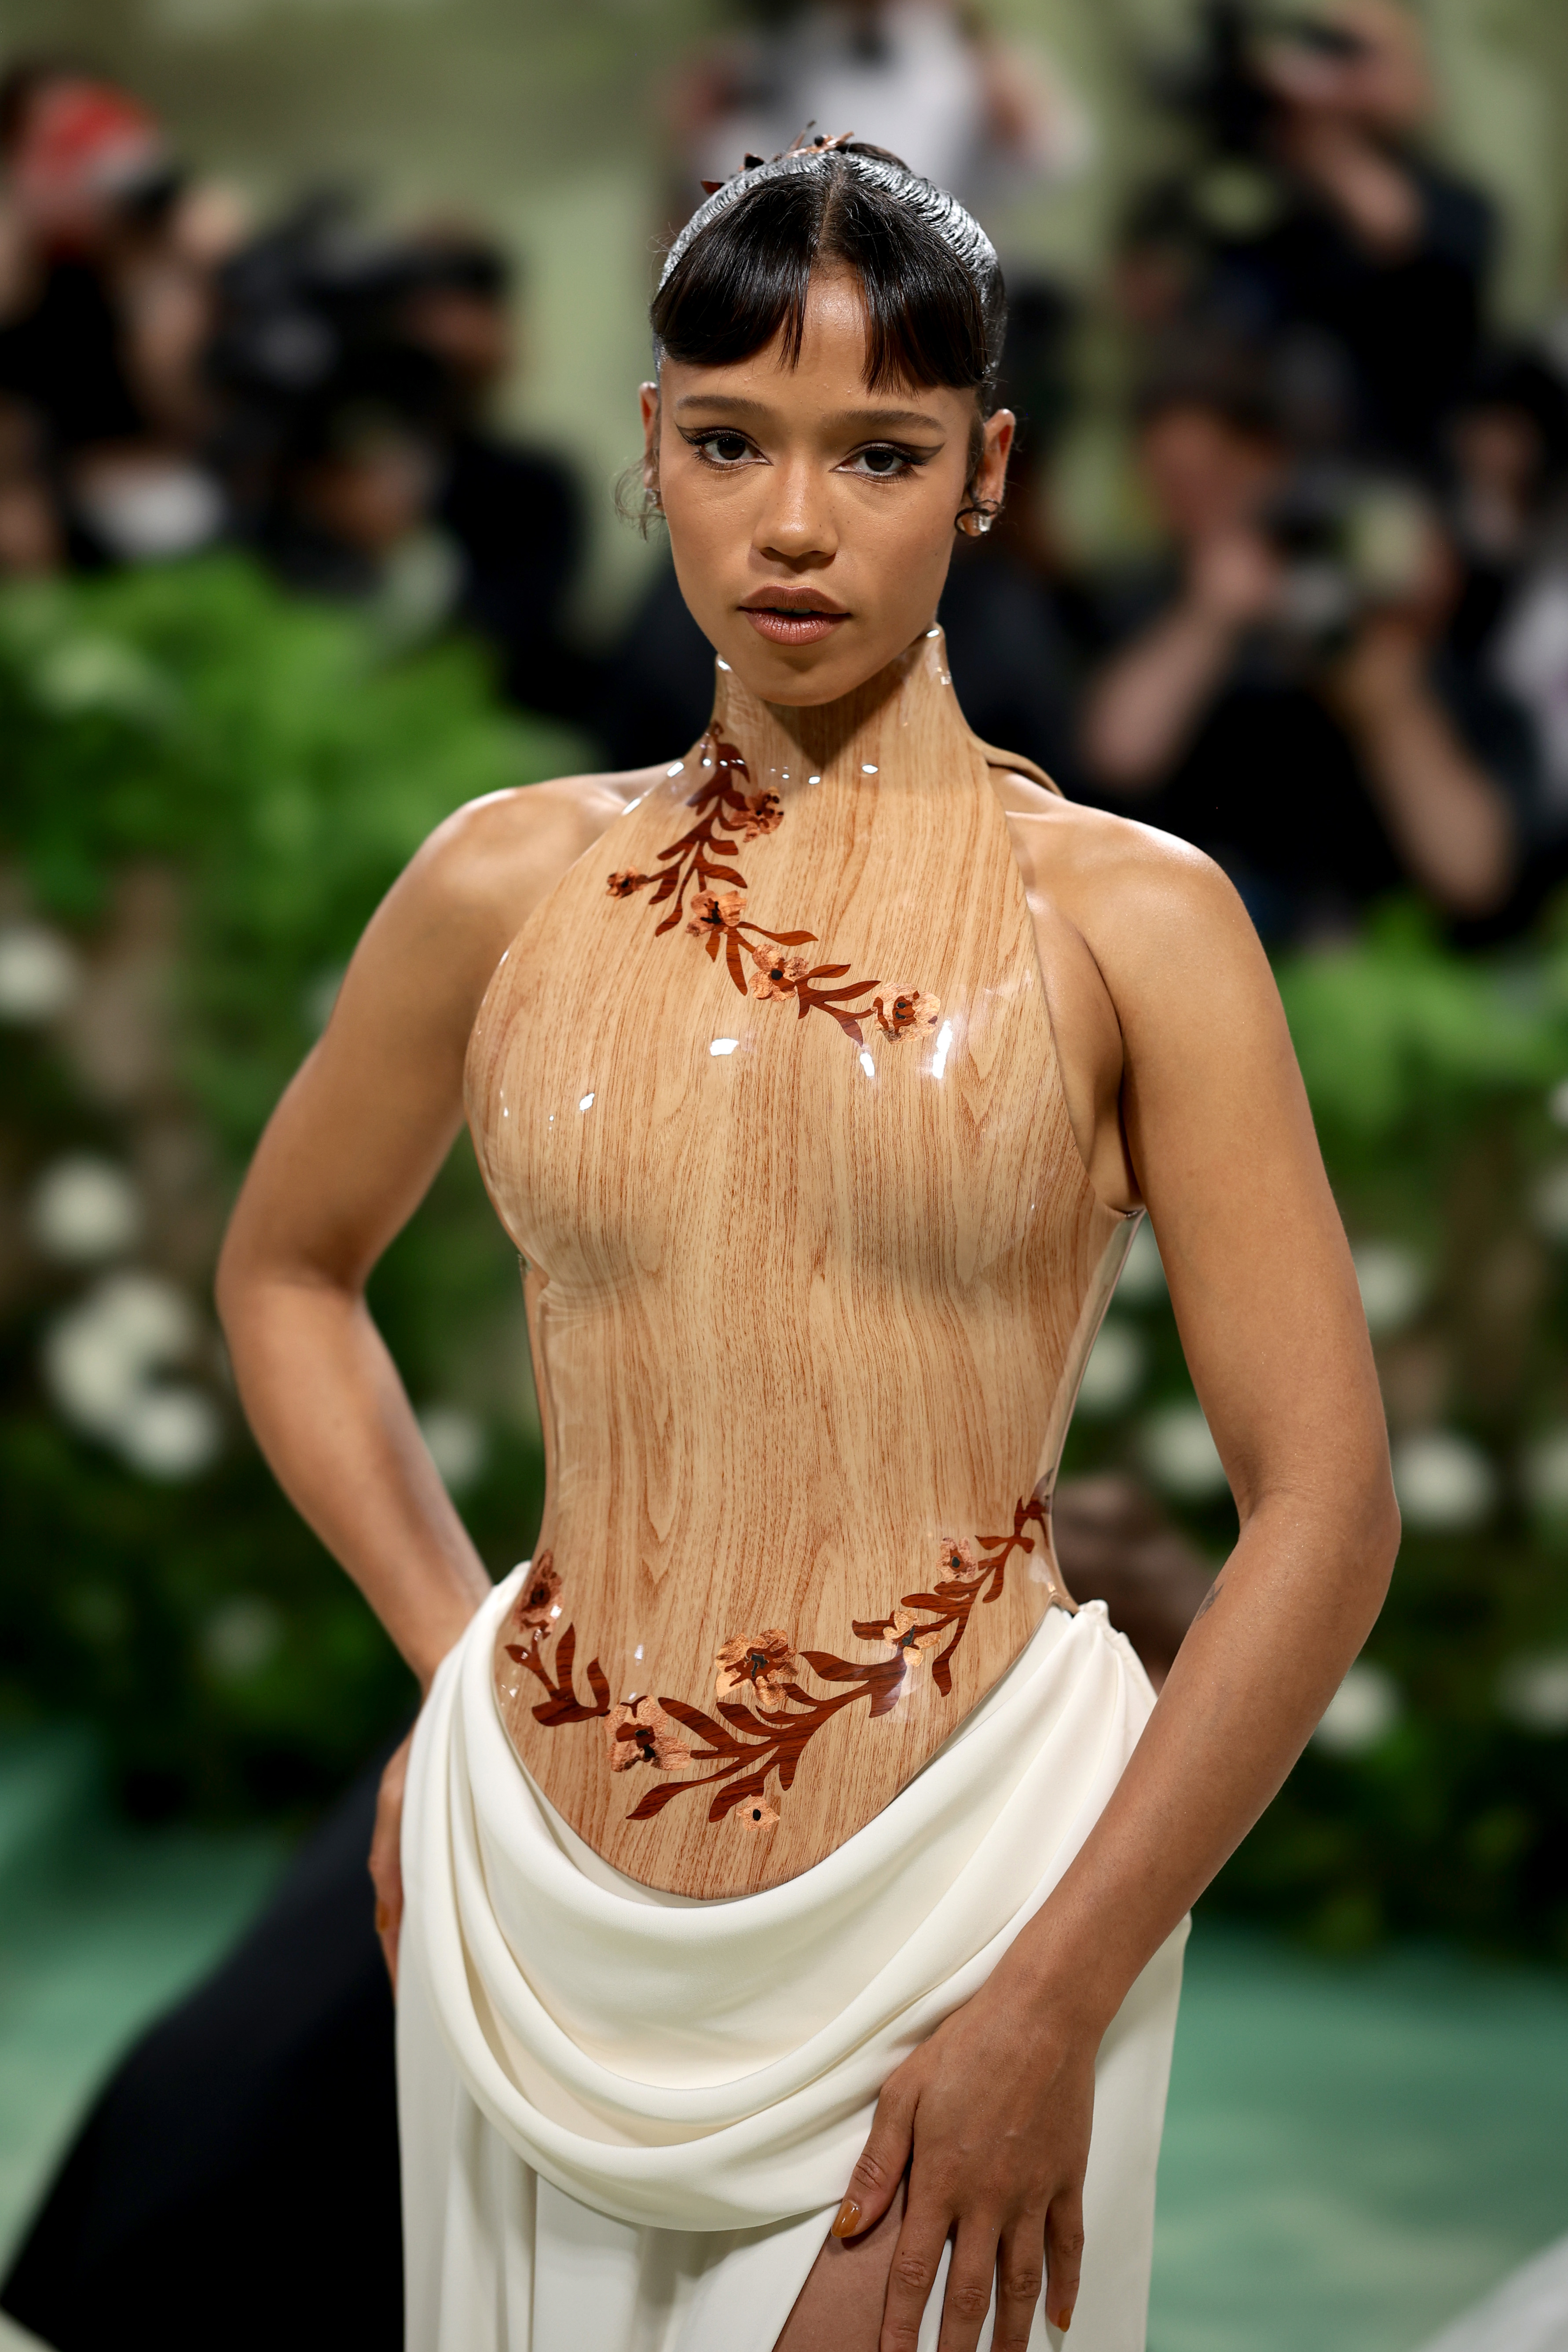 Taylor Russell in elegant dress with unique sheer top and solid bottom, posing on a carpeted area with cameras in the background